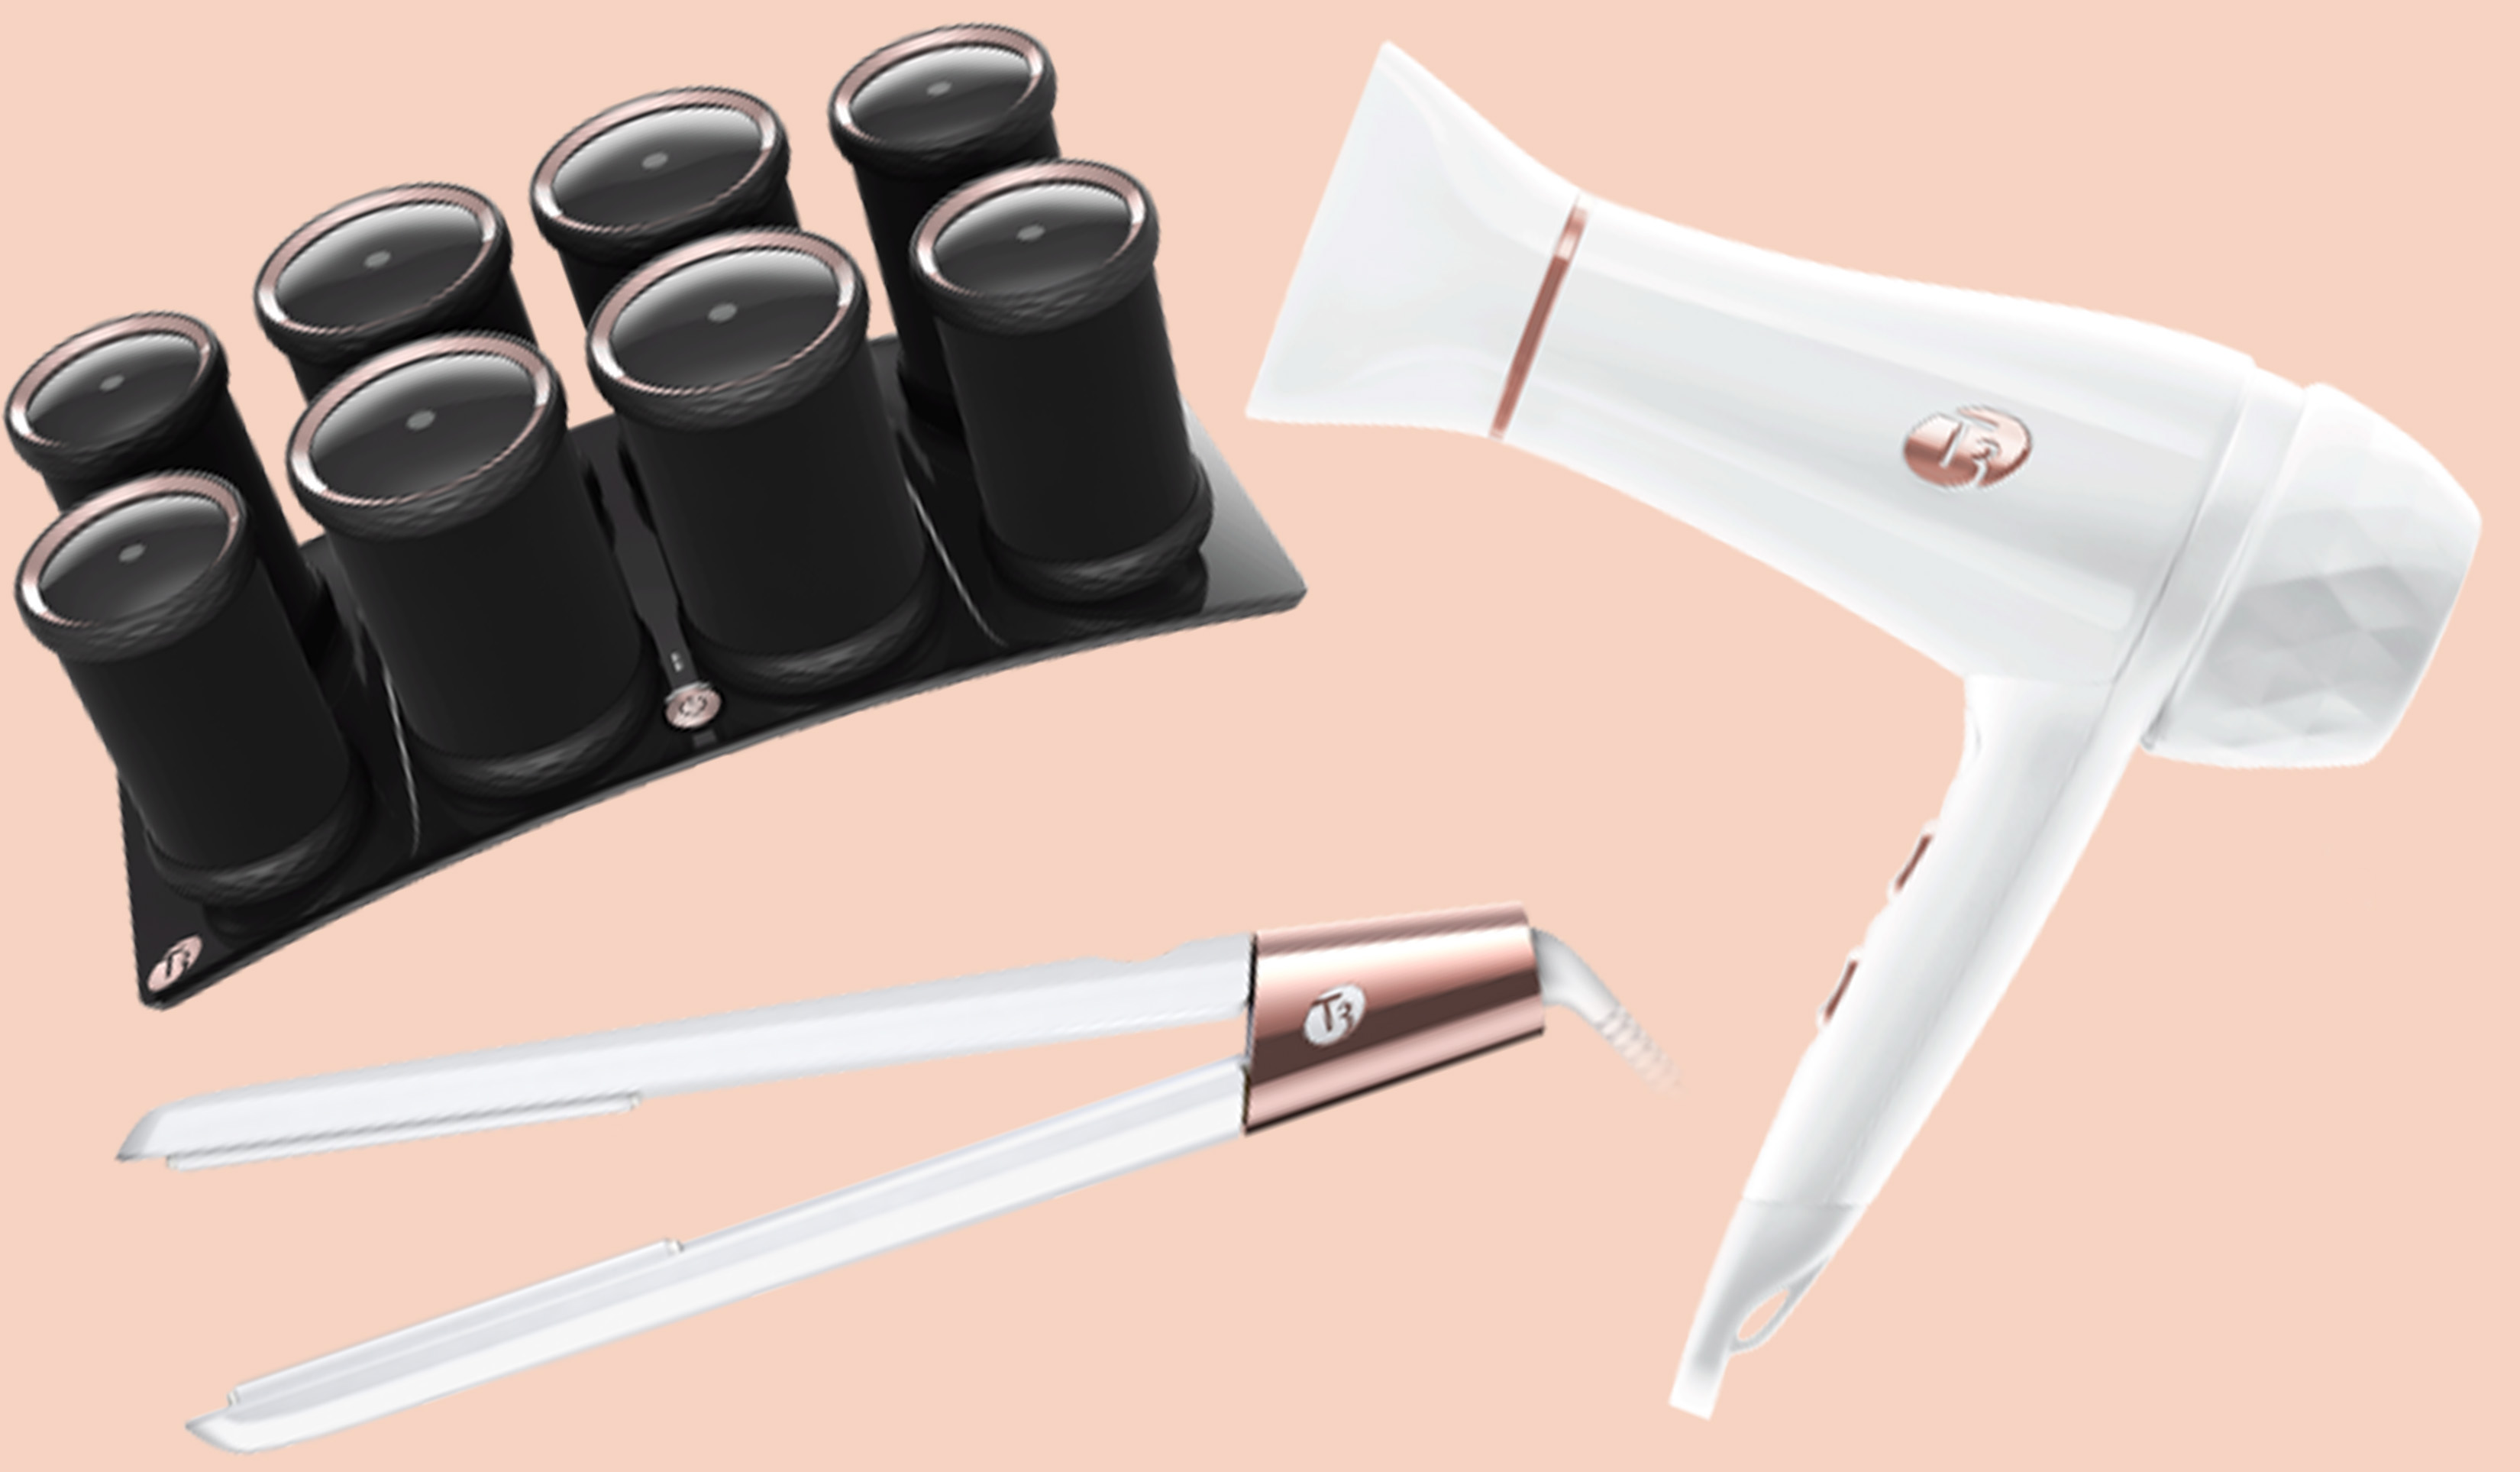 T3 volumizing hot rollers luxe, T3 straightener, featherweight dryer